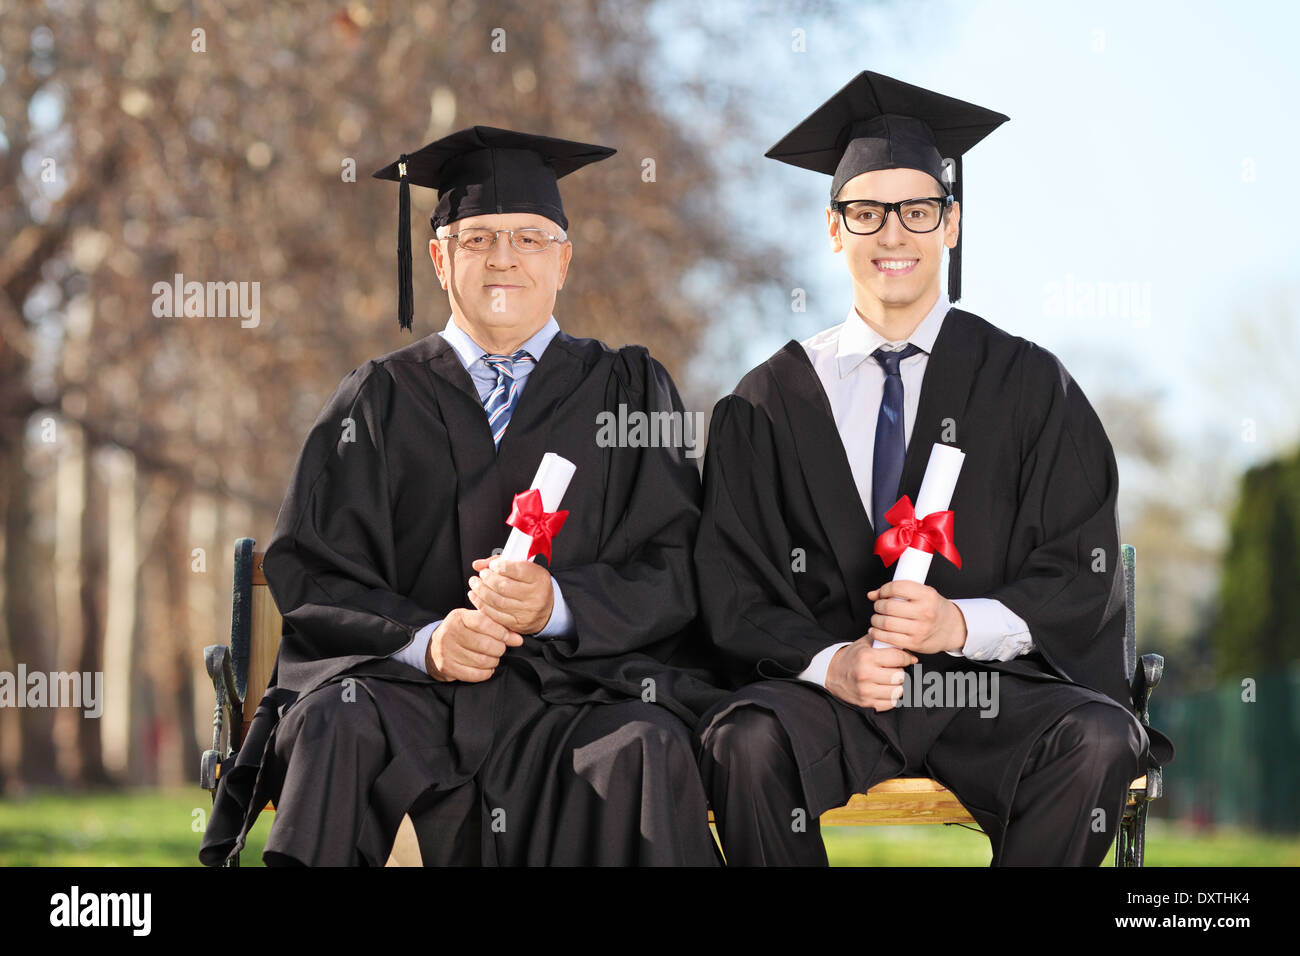 Professor and student posing on a bench in park Stock Photo